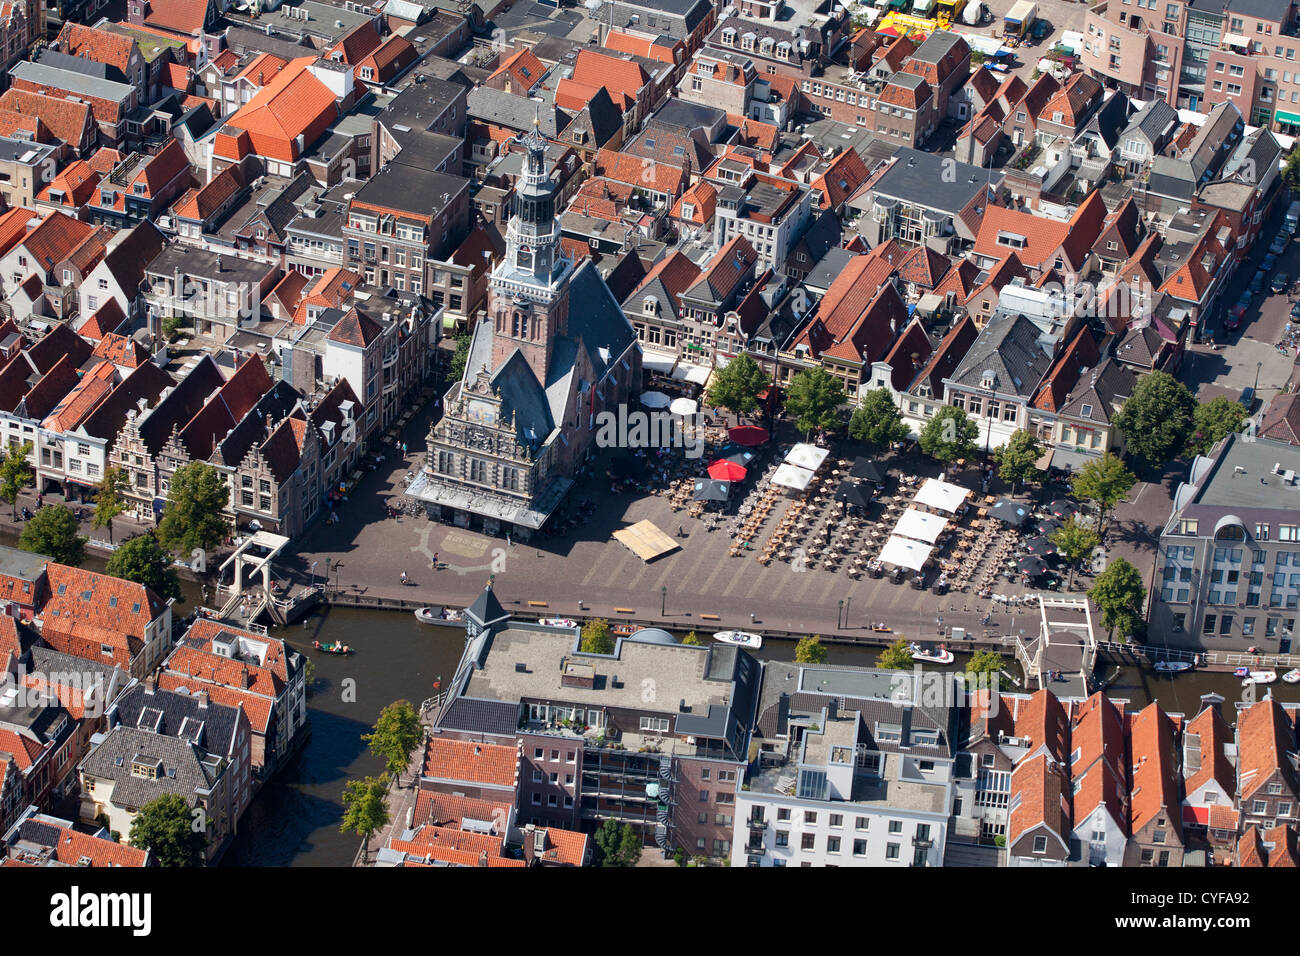 The Netherlands, Alkmaar. Weigh house and weigh square. Location of traditional cheese market on Friday. Aerial. Stock Photo